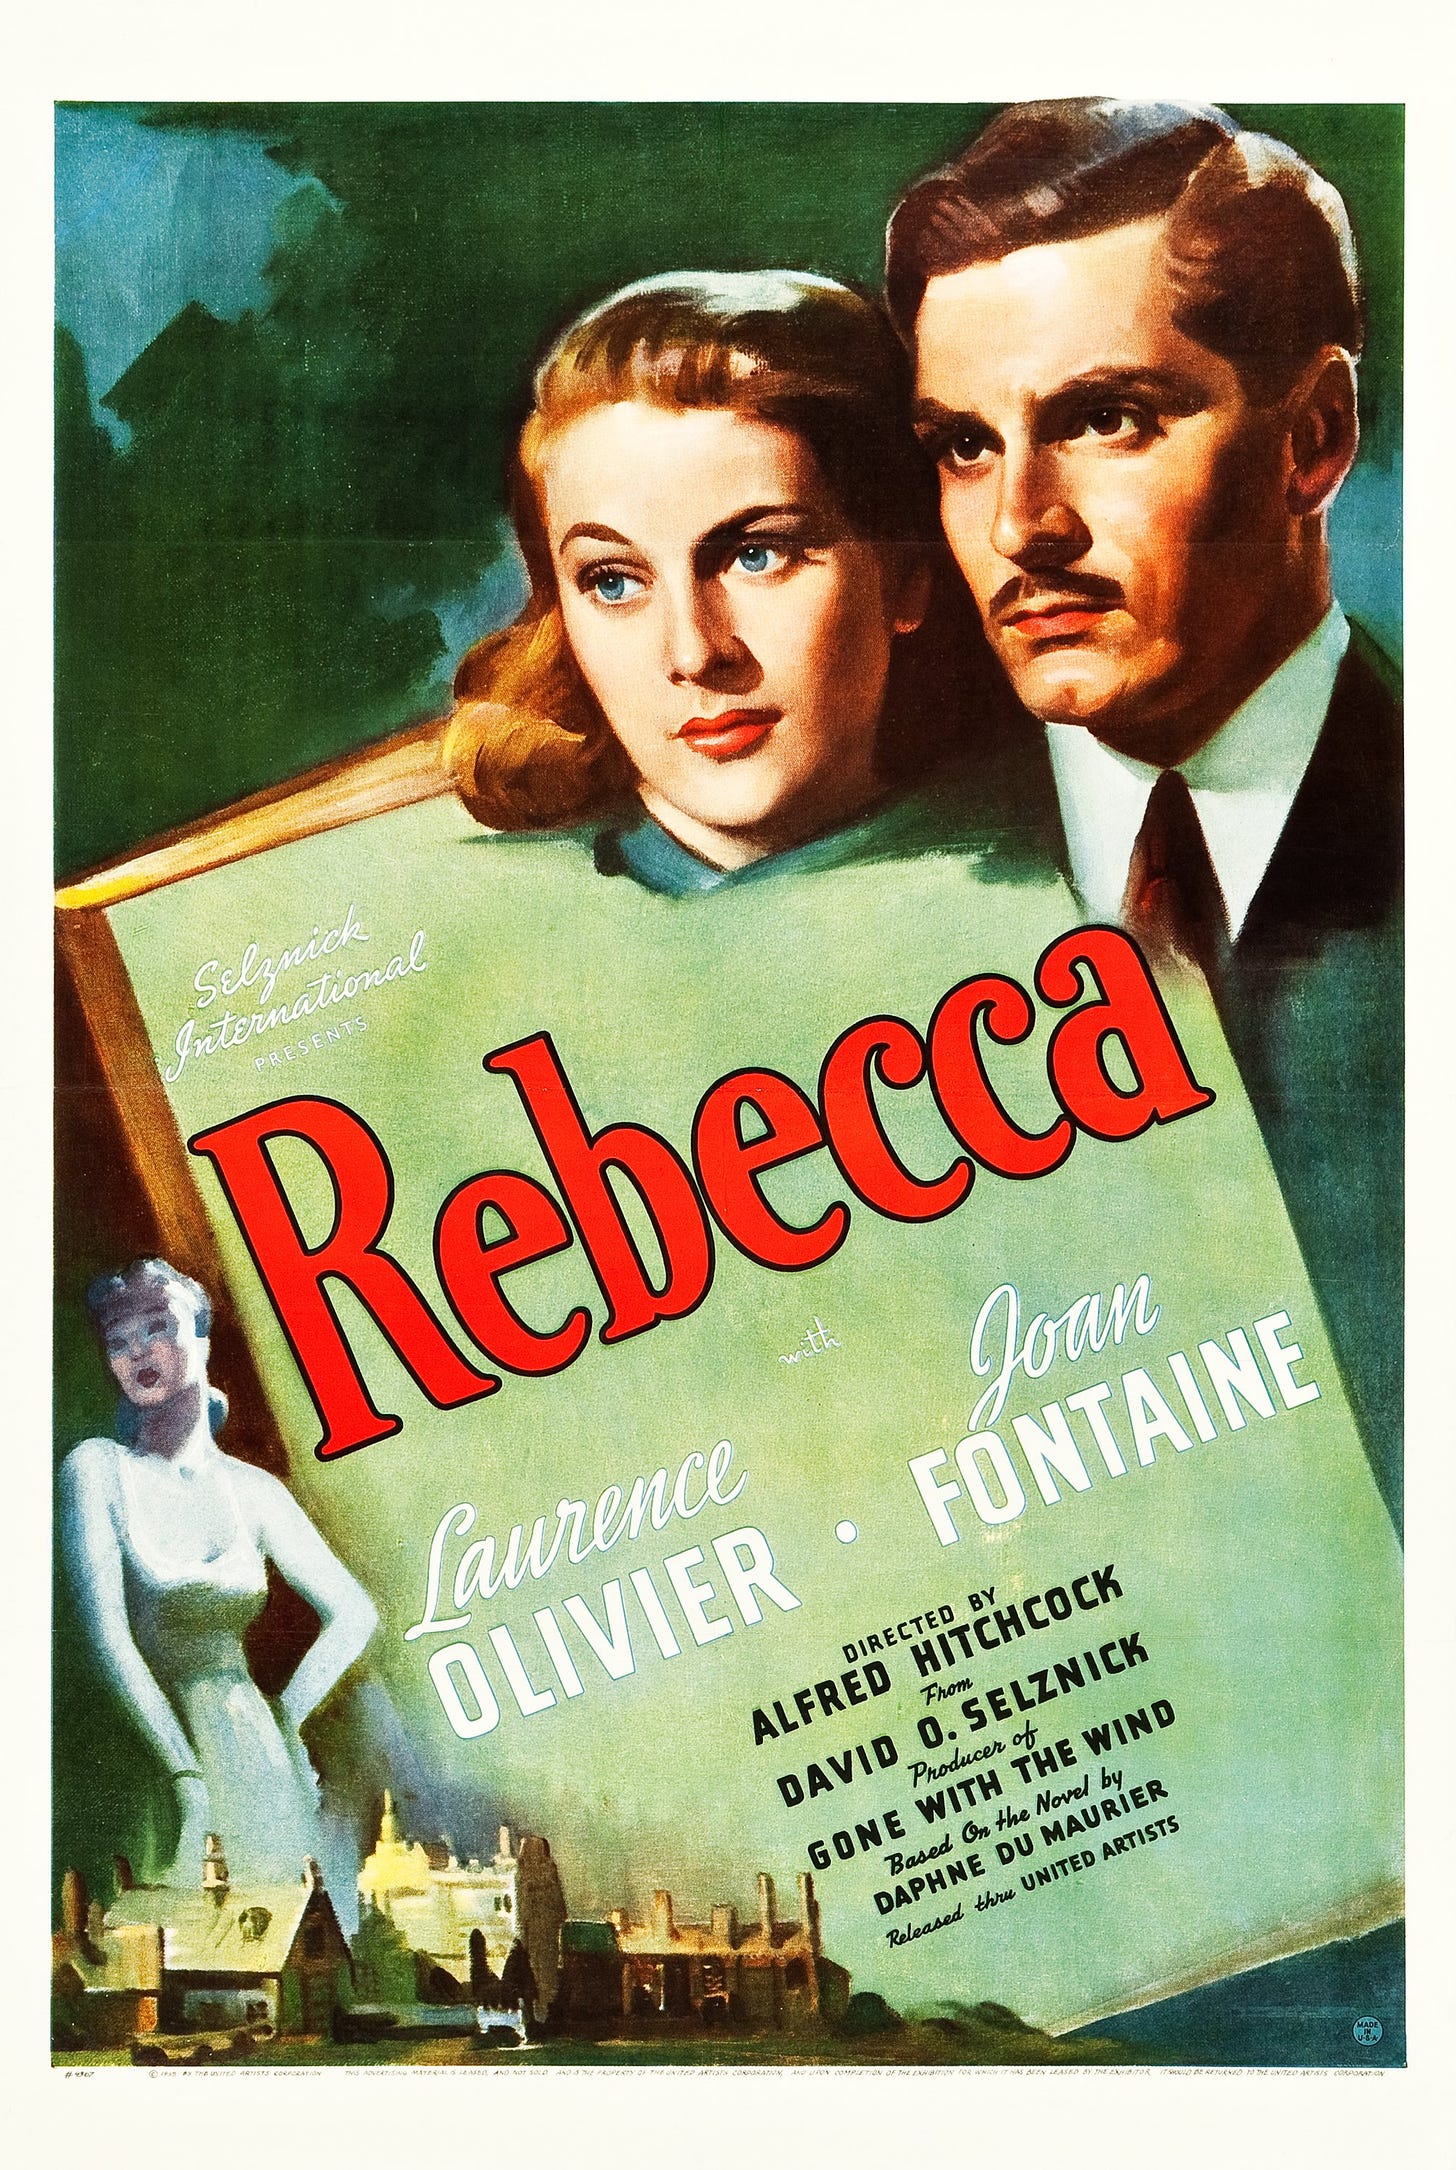 Brightly coloured 30s style movie poster for the 1939 Laurence Olivier and Joan Fontaine film version, directed by Alfred Hitchcock, of Daphne du Maurier's novel, Rebecca.